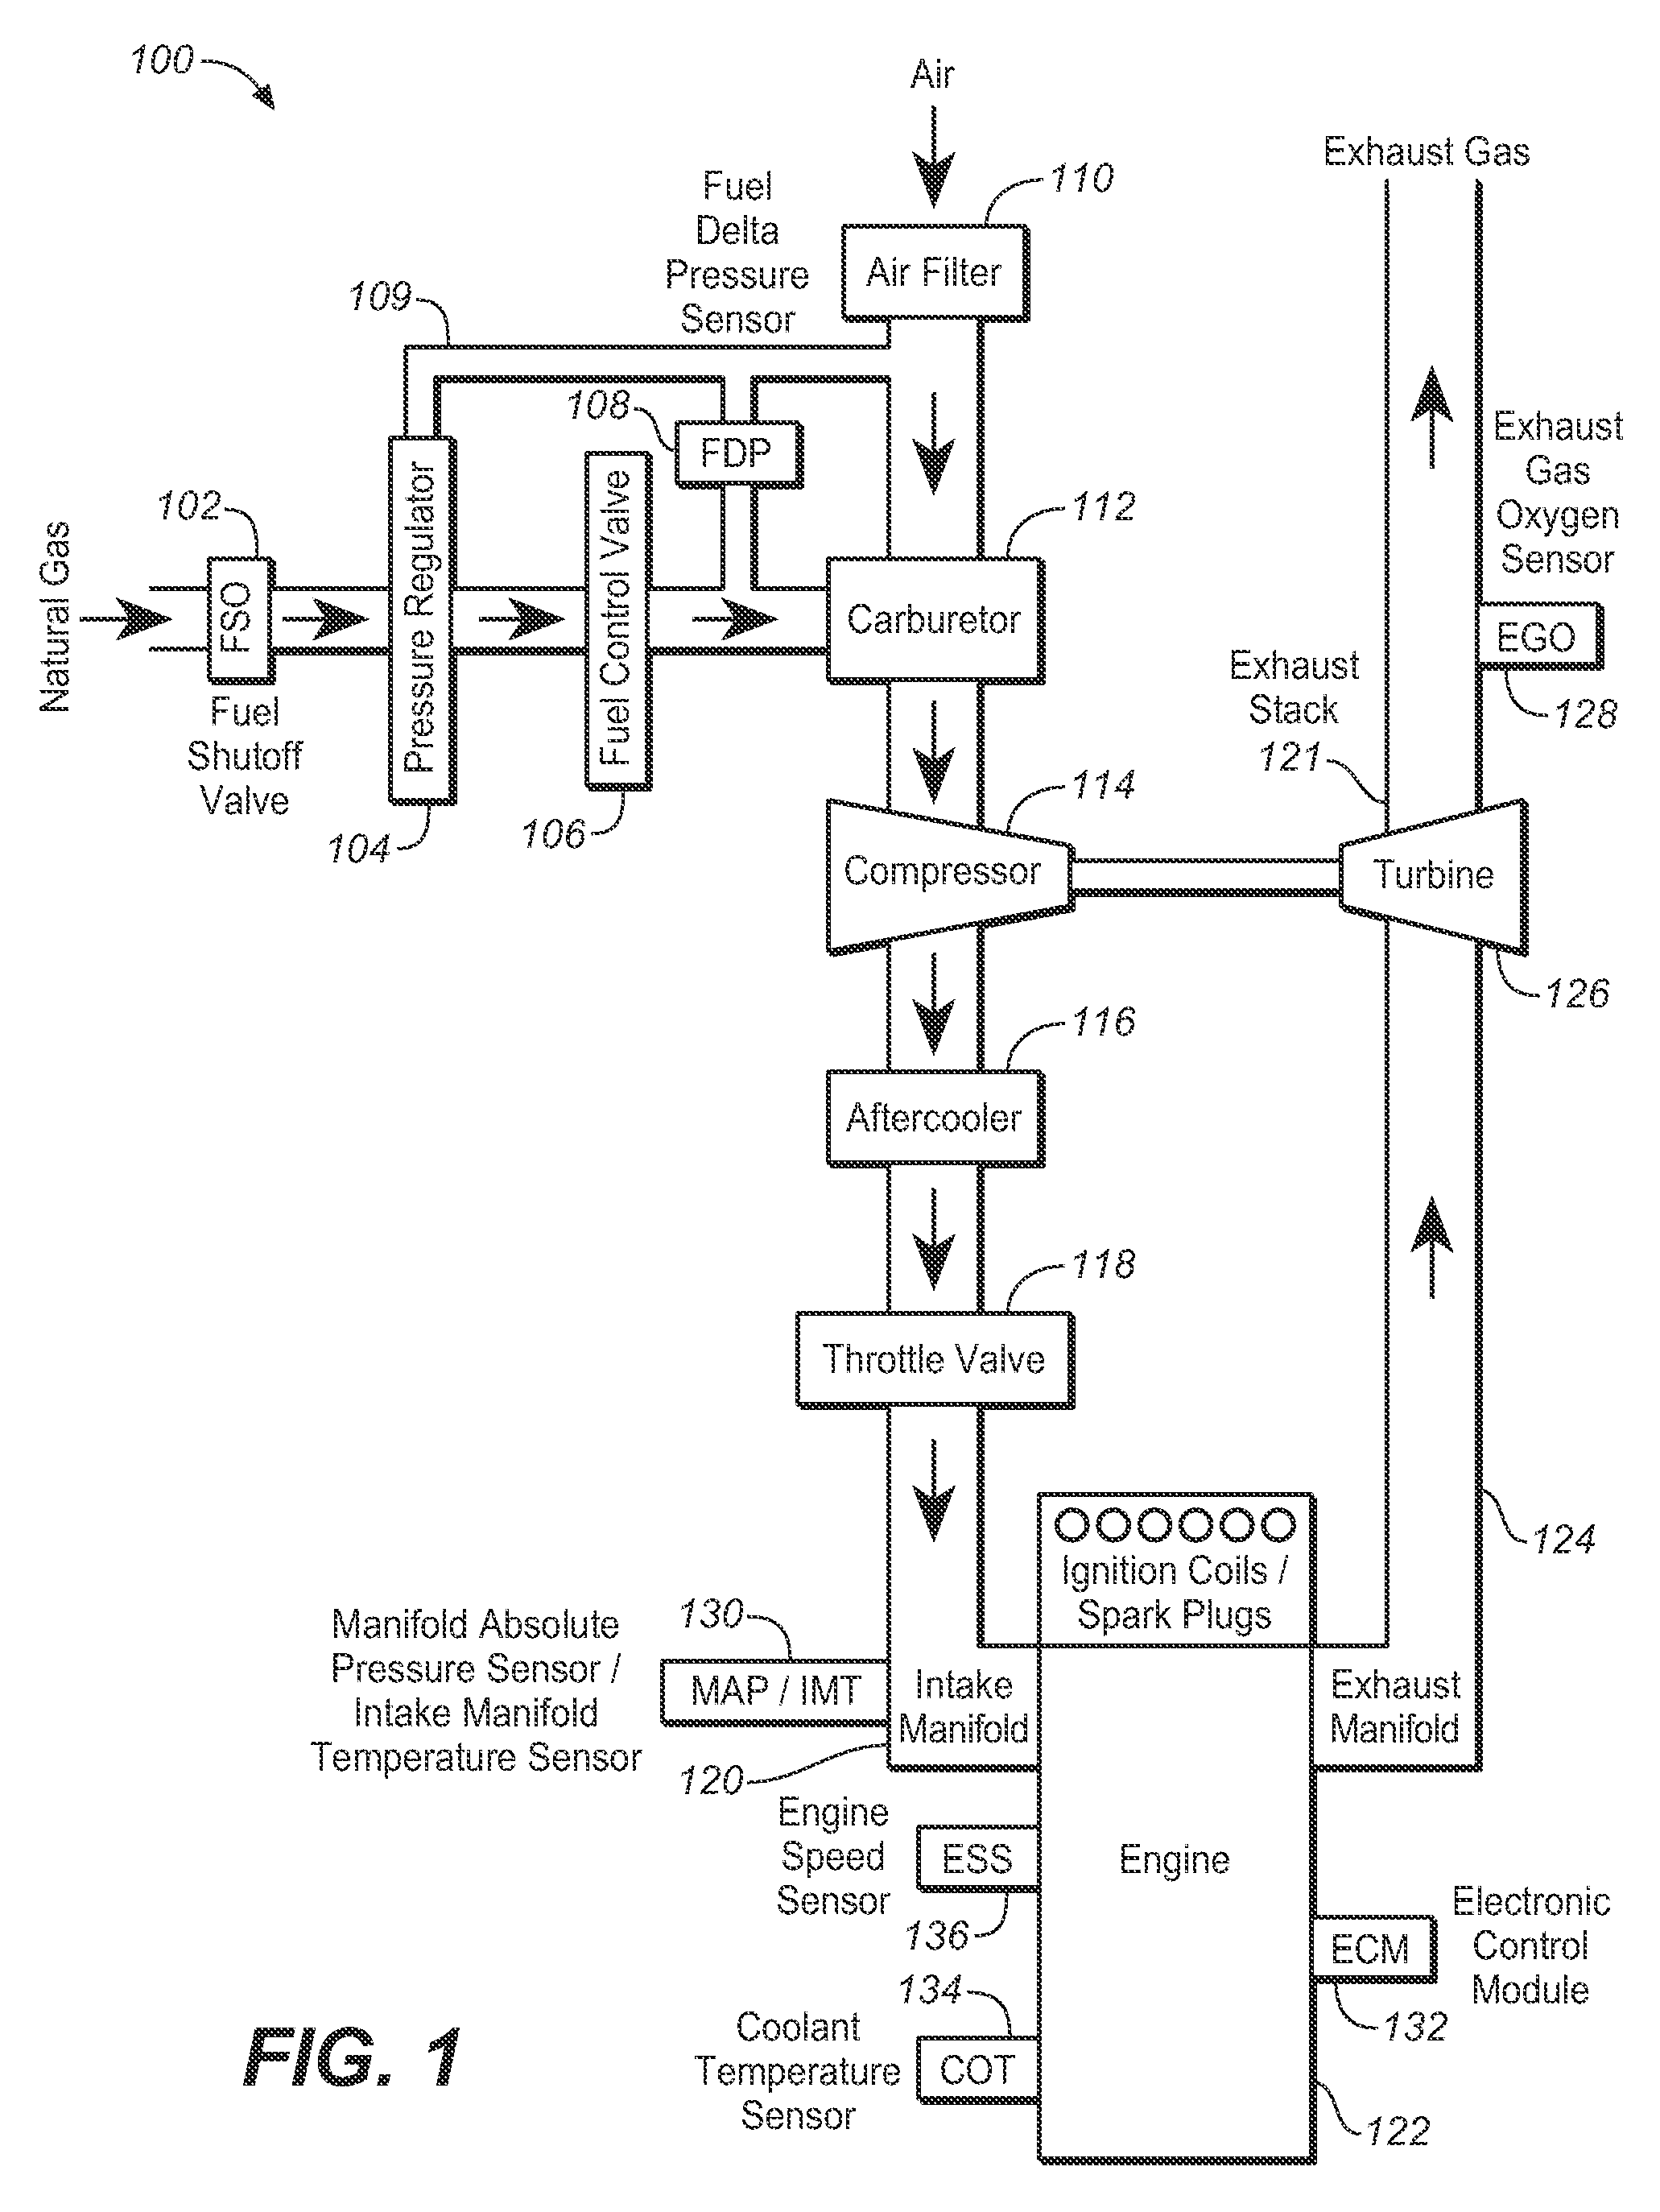 Method and system for closed loop lambda control of a gaseous fueled internal combustion engine